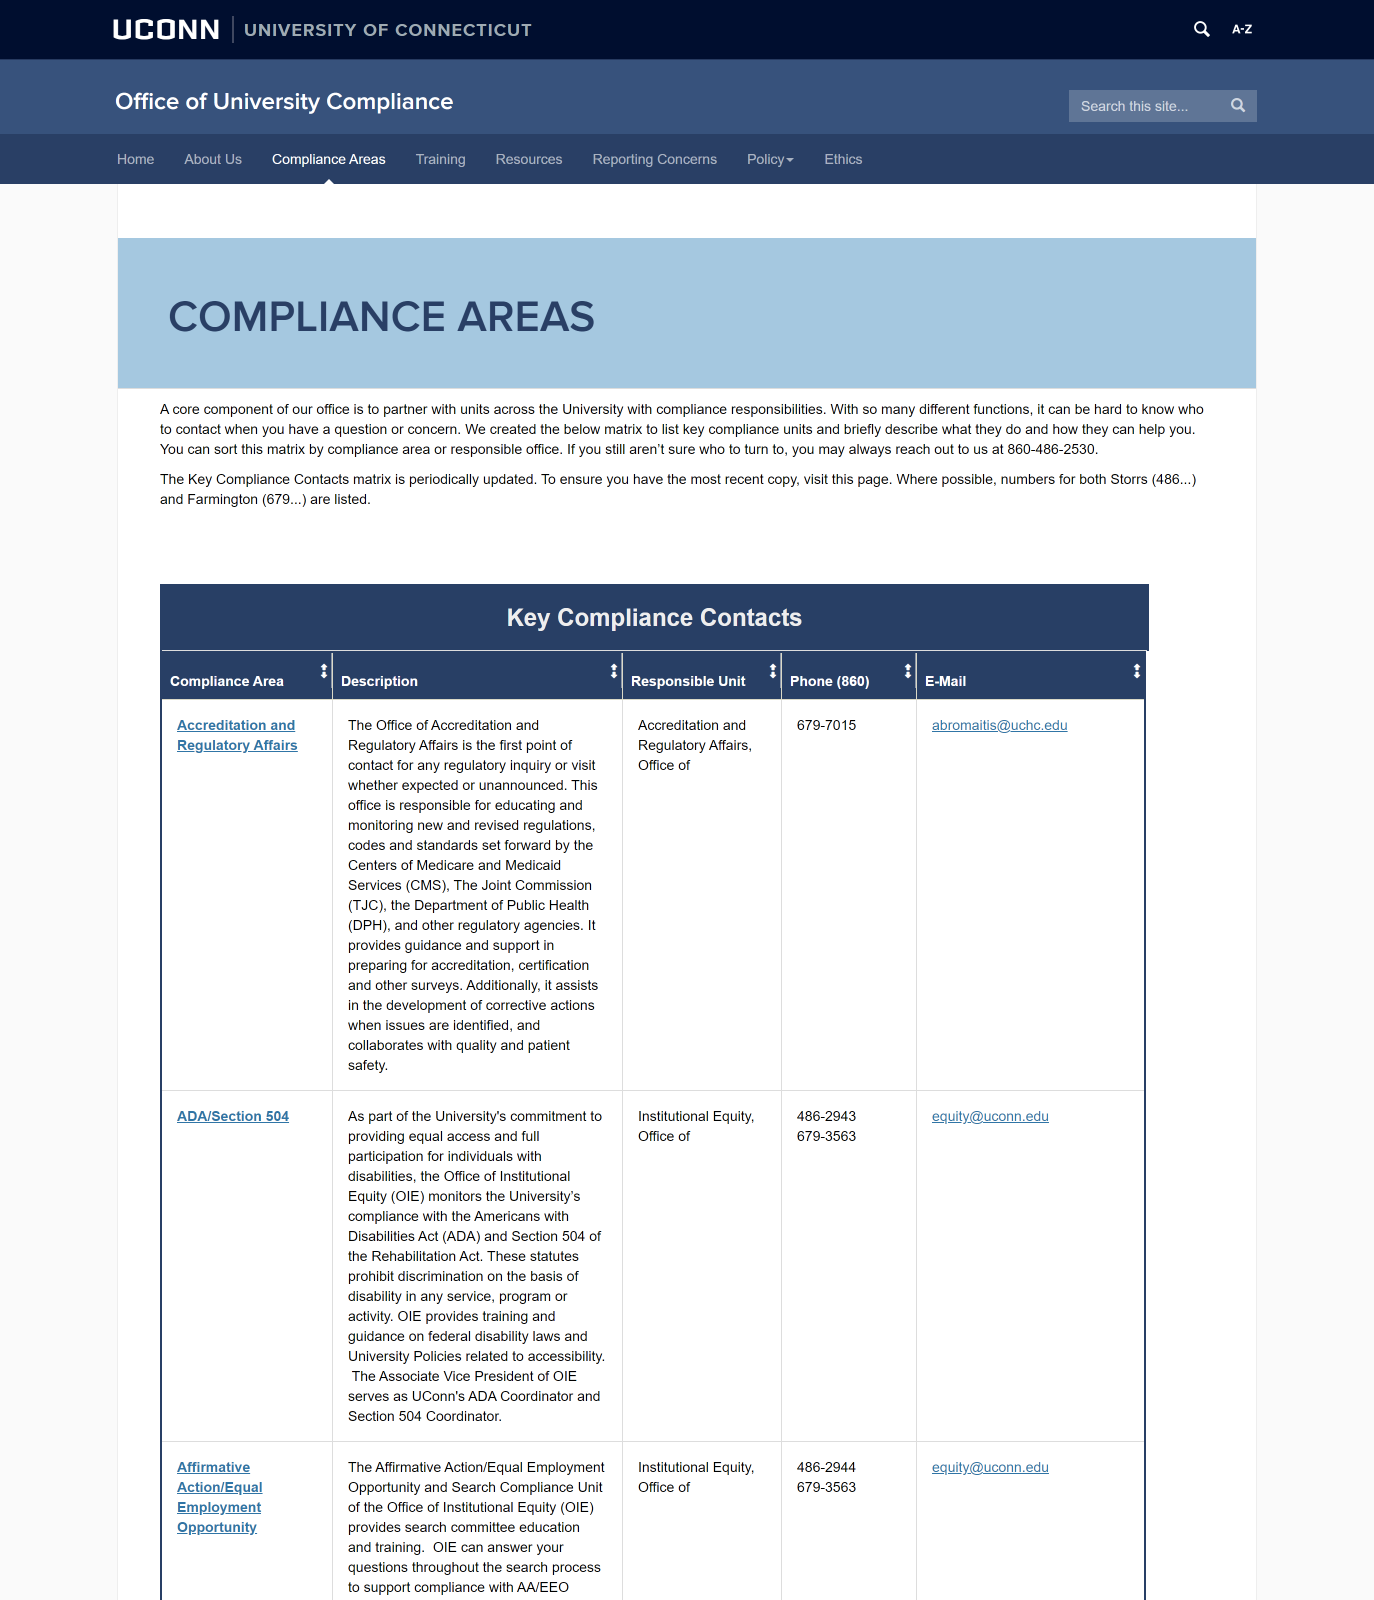 Screenshot of an interior page of the Compliance website